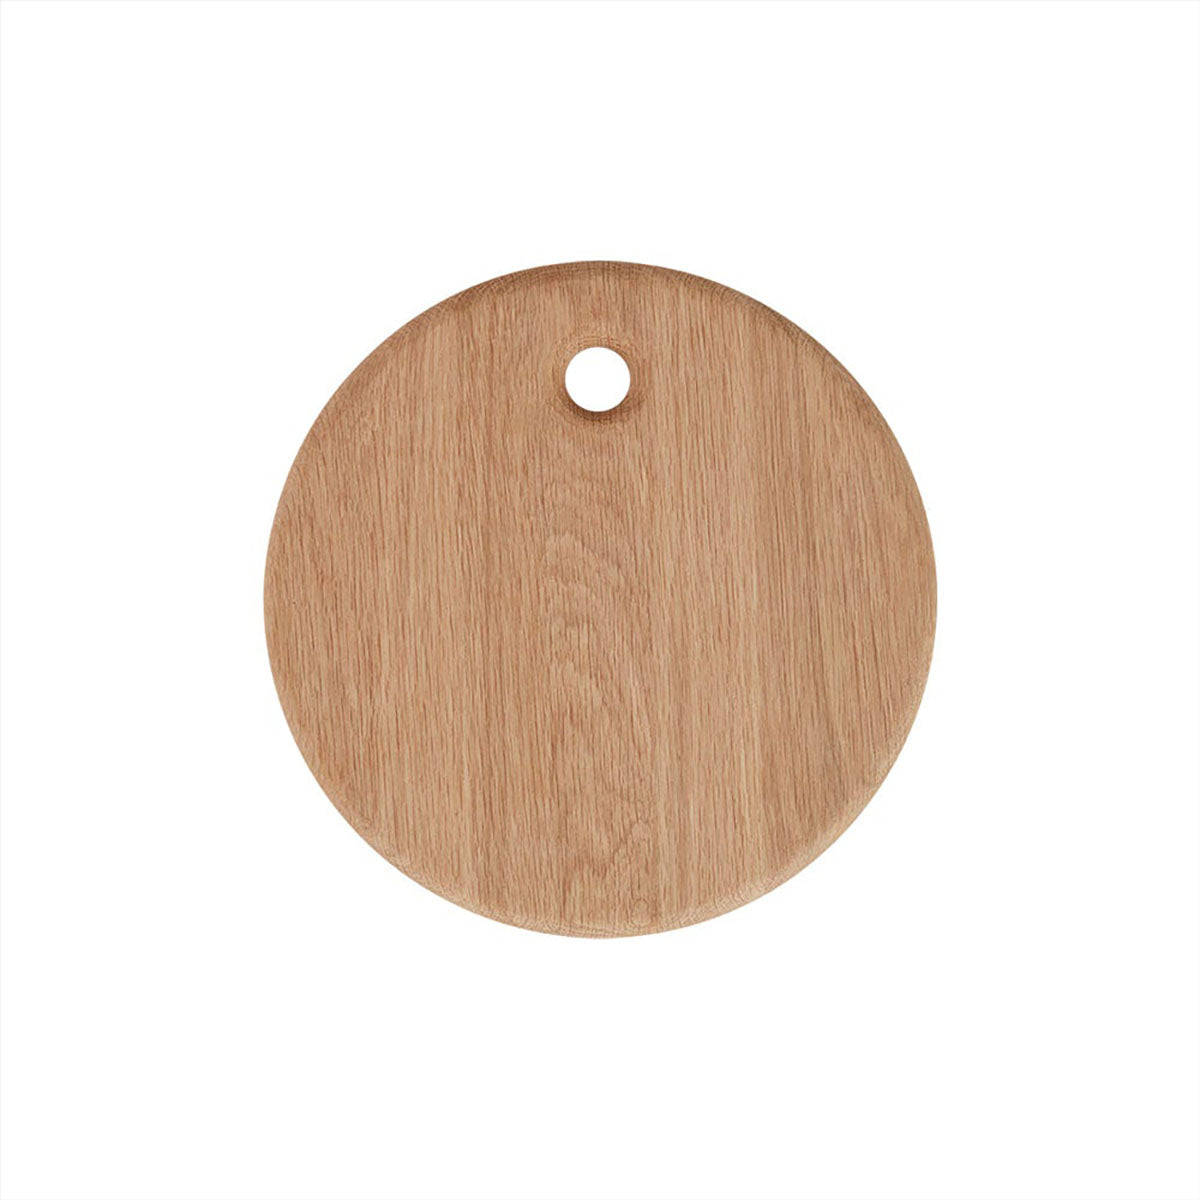 OYOY LIVING Yumi Cutting Board - Round Kitchen accessories 901 Nature